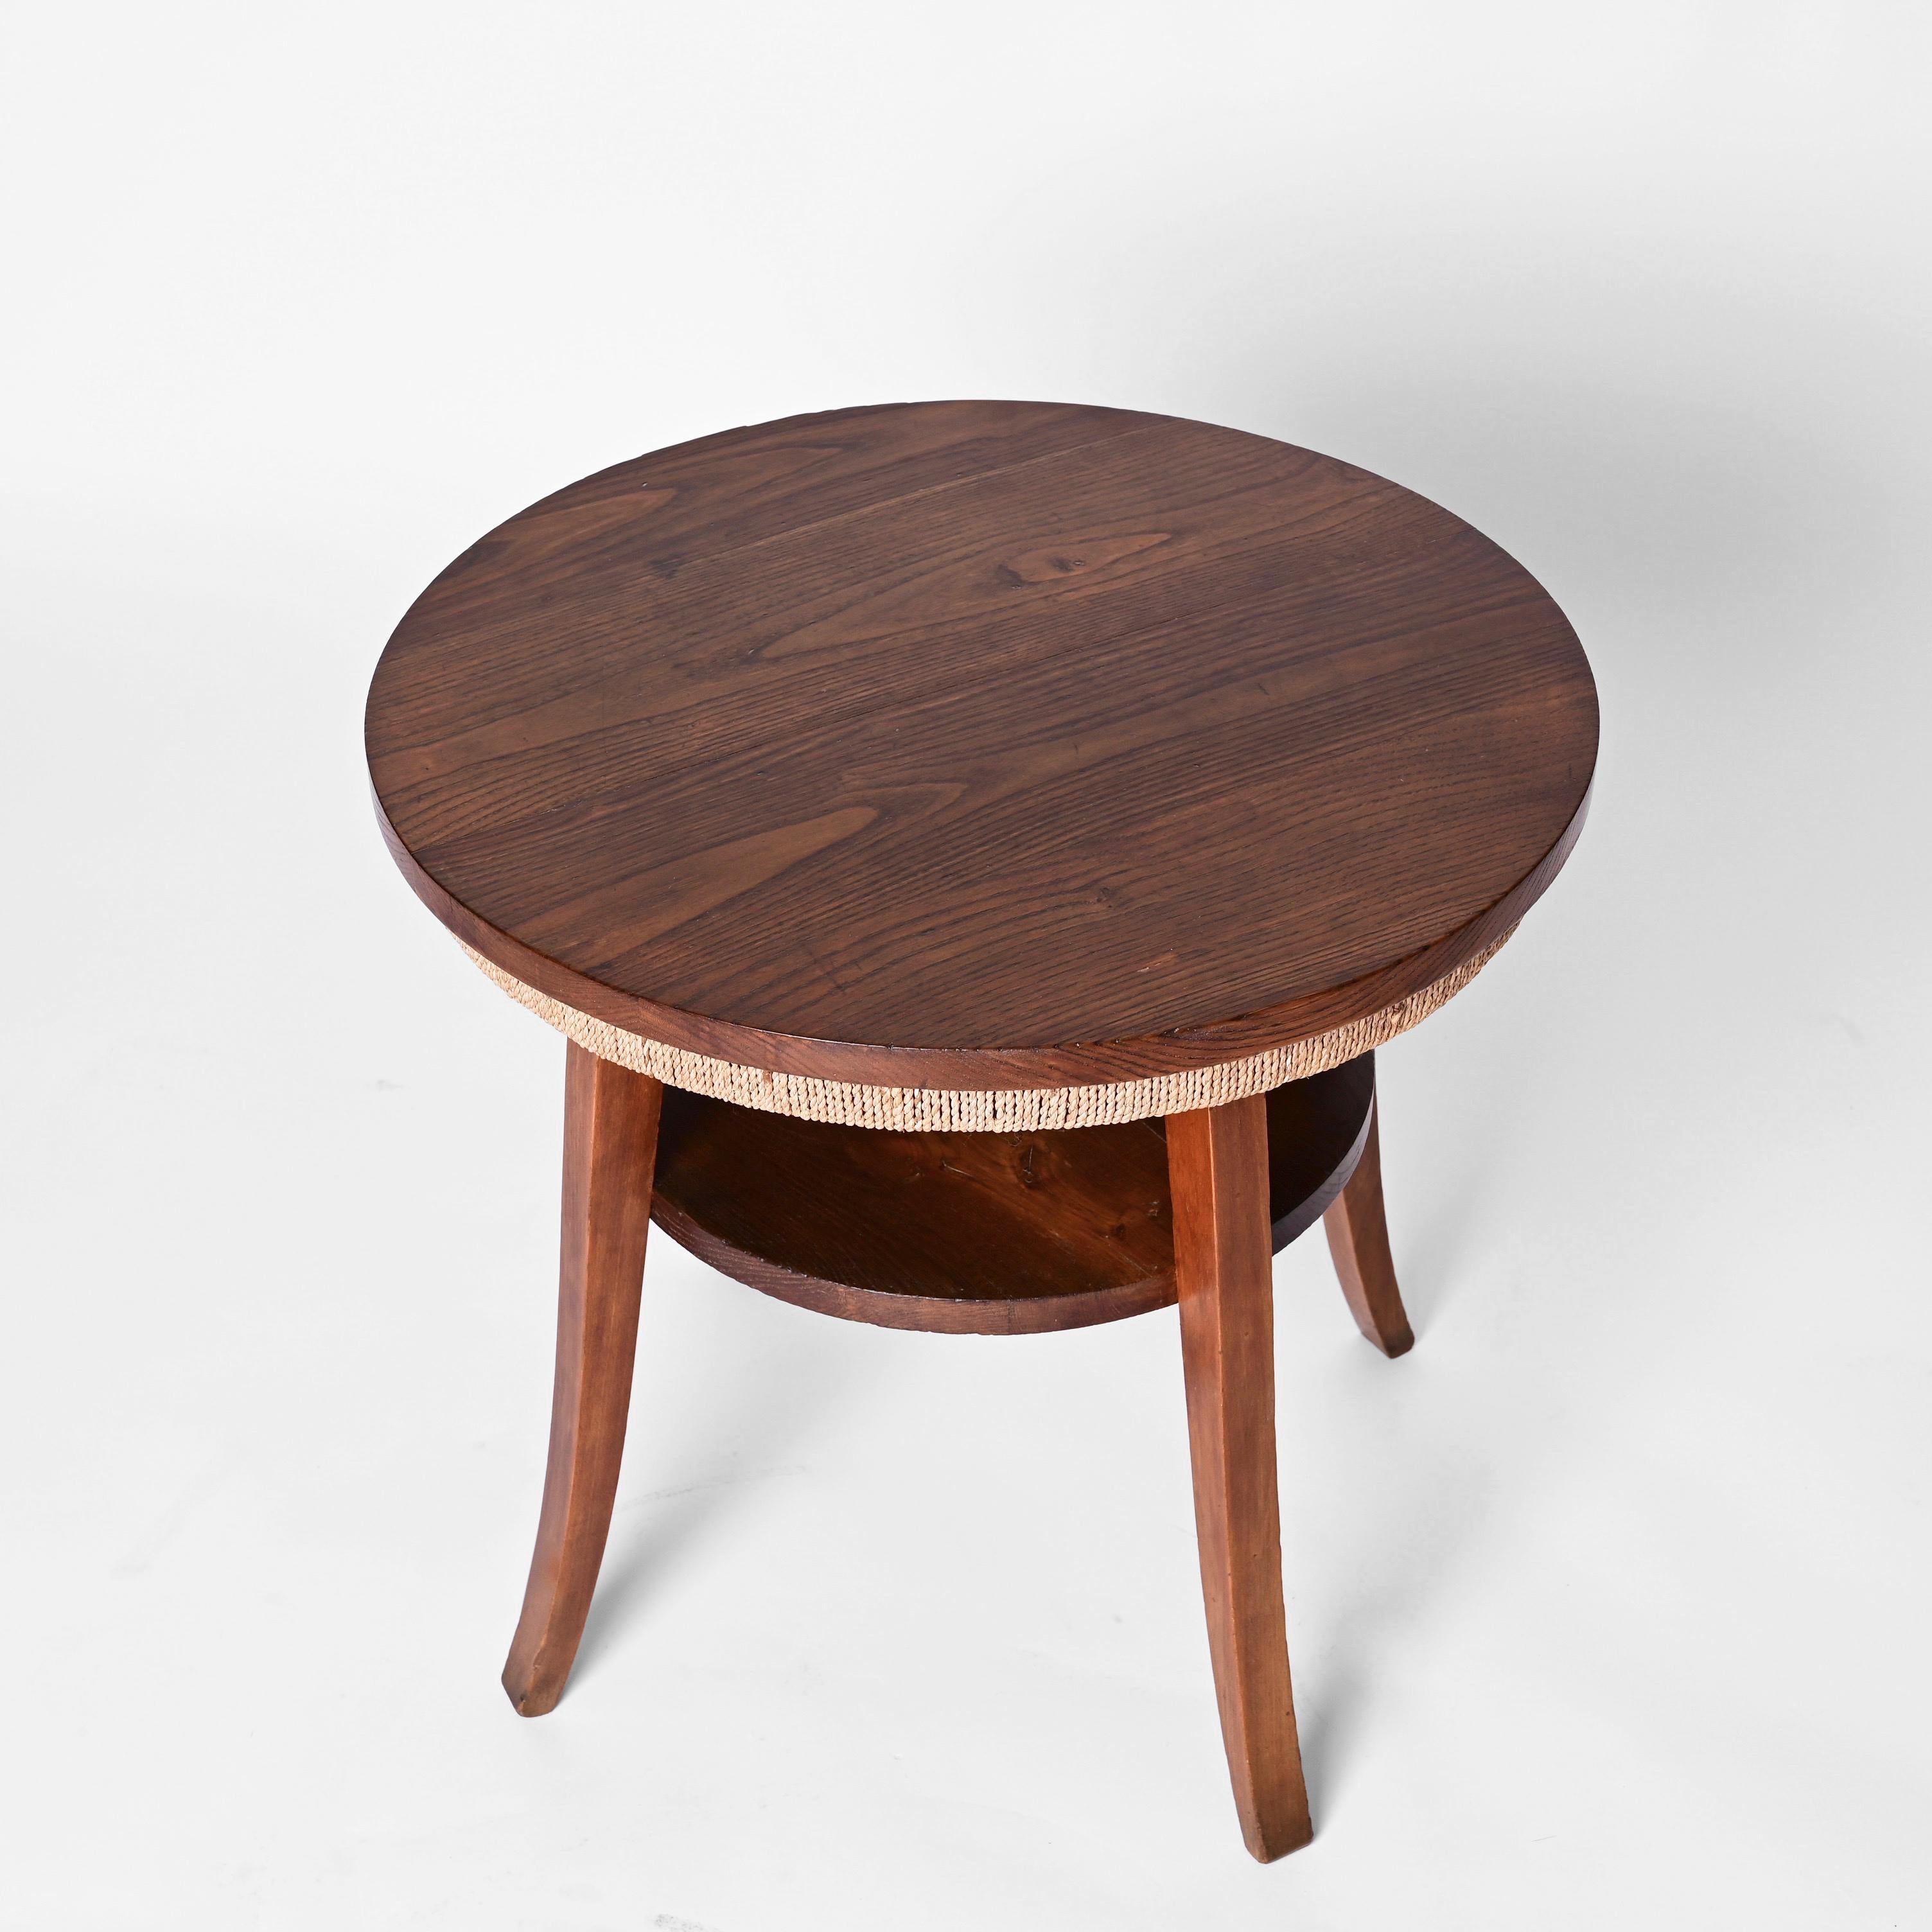 Midcentury Two-Tier Round Rope and Chestnut Wood Italian Coffee Table, 1950s For Sale 9